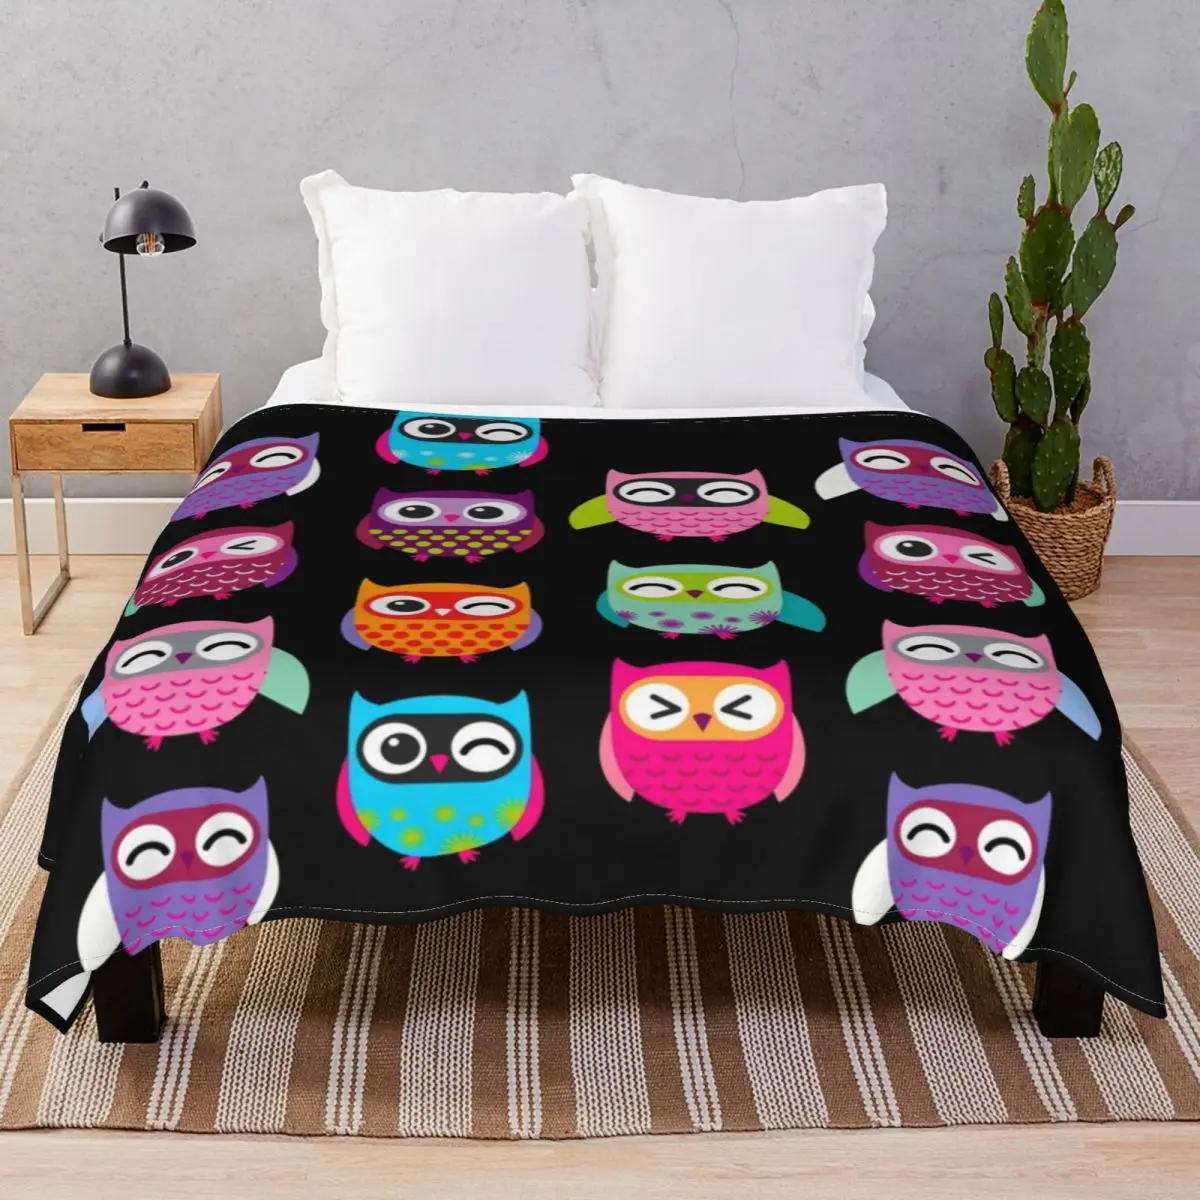 Cute Colorful Owls Blankets Flannel Spring/Autumn Multifunction Throw Blanket for Bedding Home Couch Travel Office